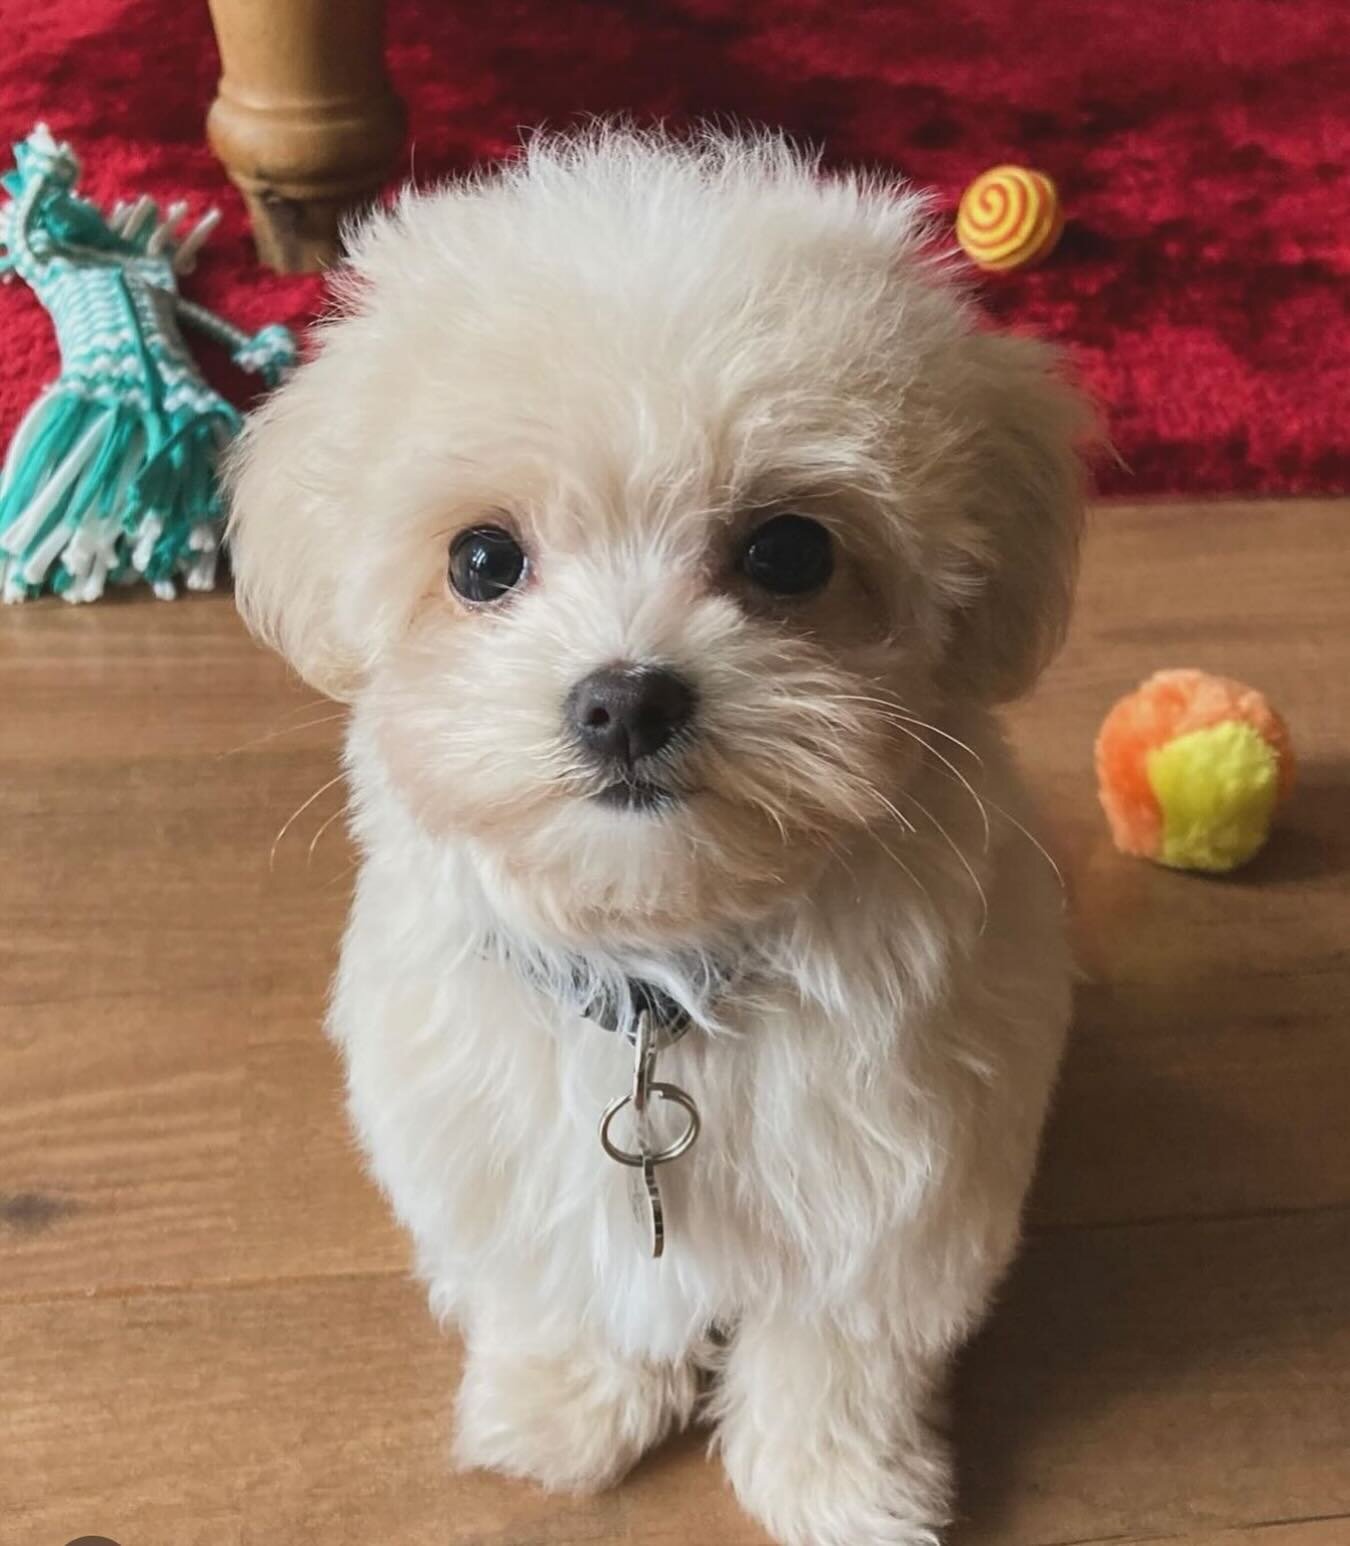 We&rsquo;re not just about foxes, we love the doggies too. How could we not&hellip;.look at @eadiebear_minimaltipoo , officially the cutest dog in the world and our tiniest customer so far. We love you Eadie, and all the doggies. 🐶❤️🐶❤️🐶